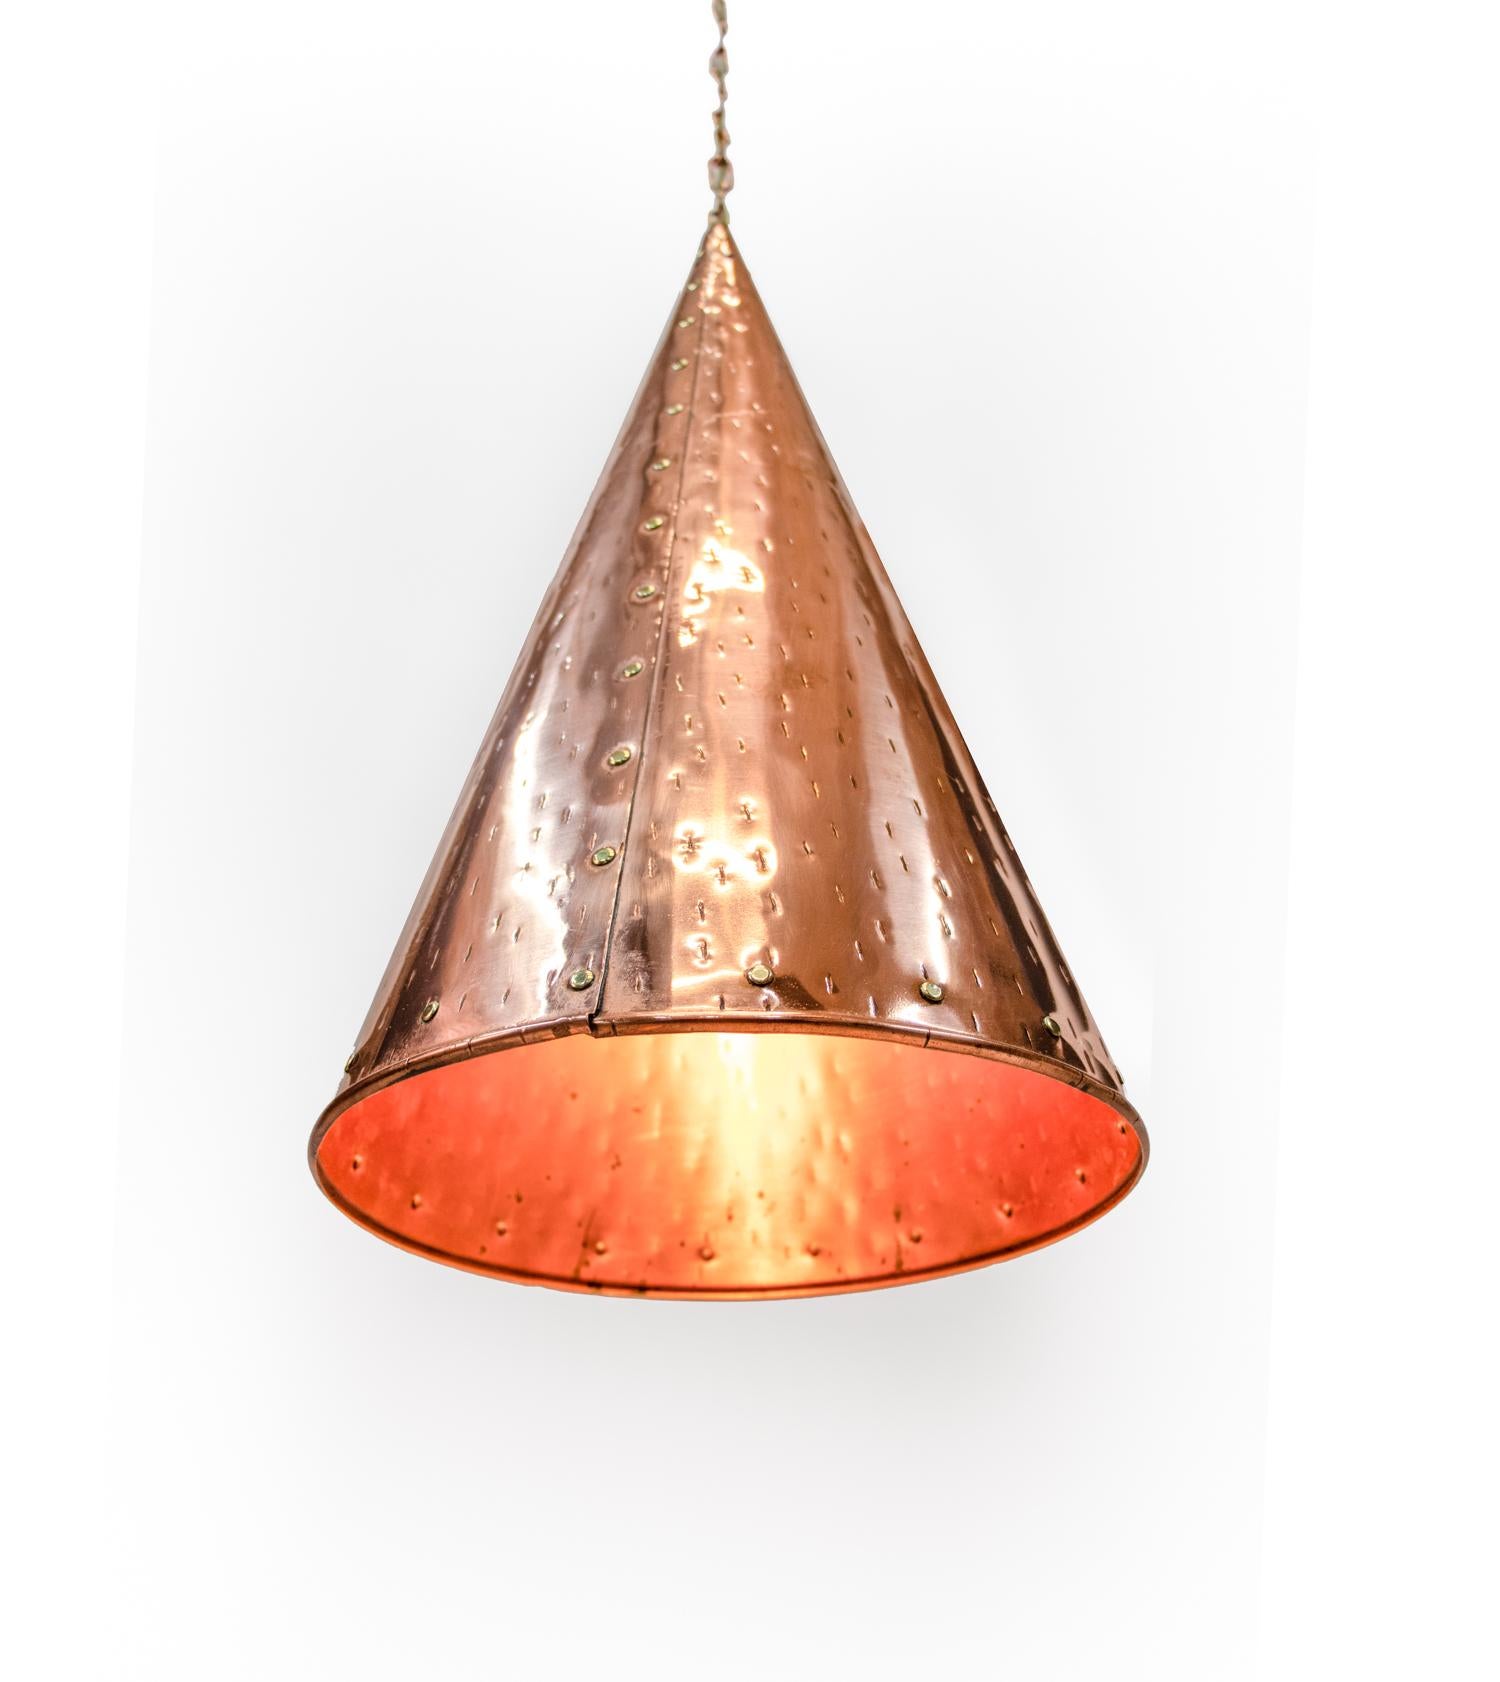 Pair of Danish Hammered Copper Cone Pendant Lamps by E.S Horn Aalestrup, 1950s For Sale 1